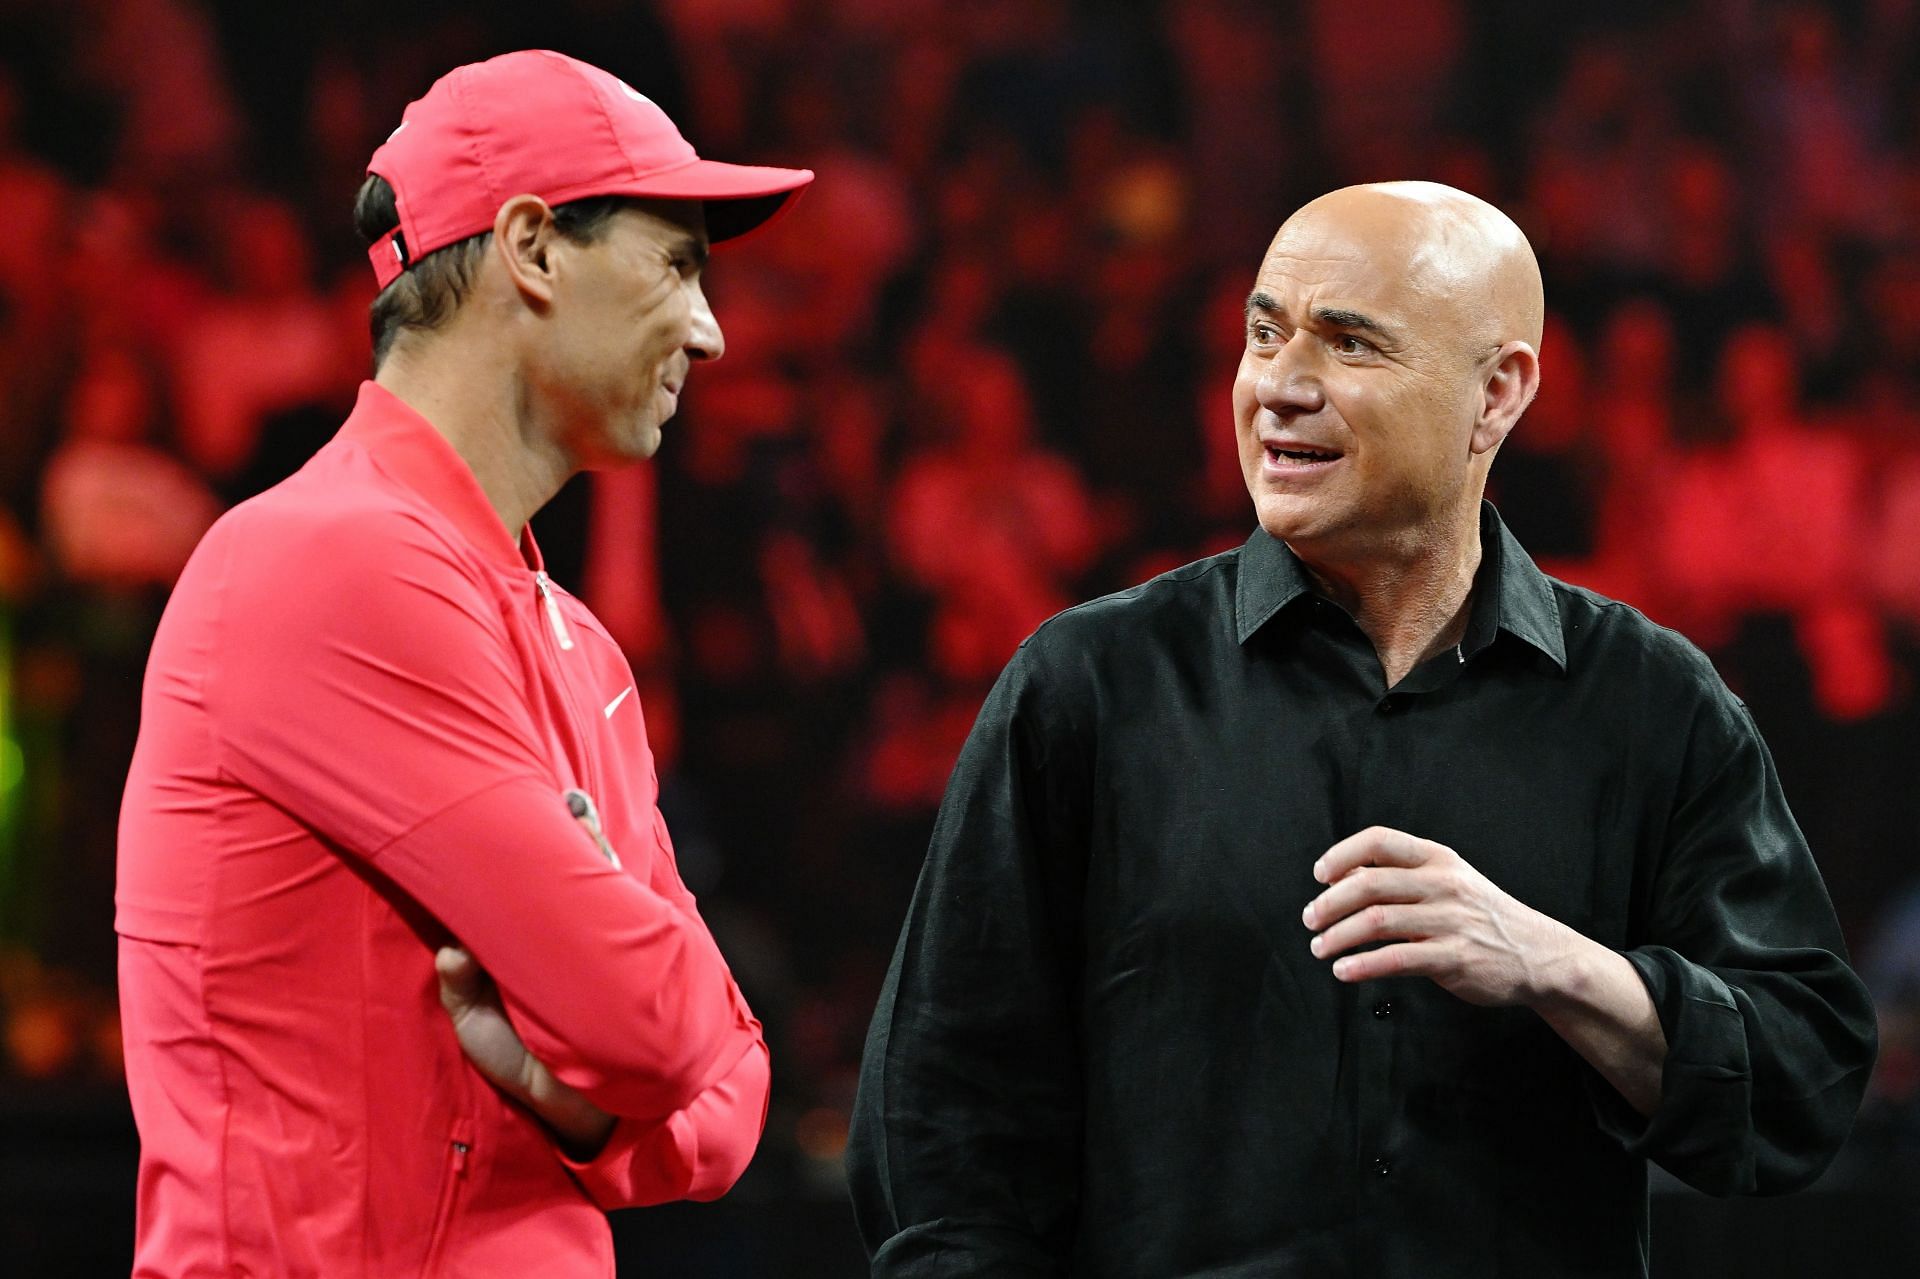 Rafael Nadal with Andre Agassi at the Netflix Slam